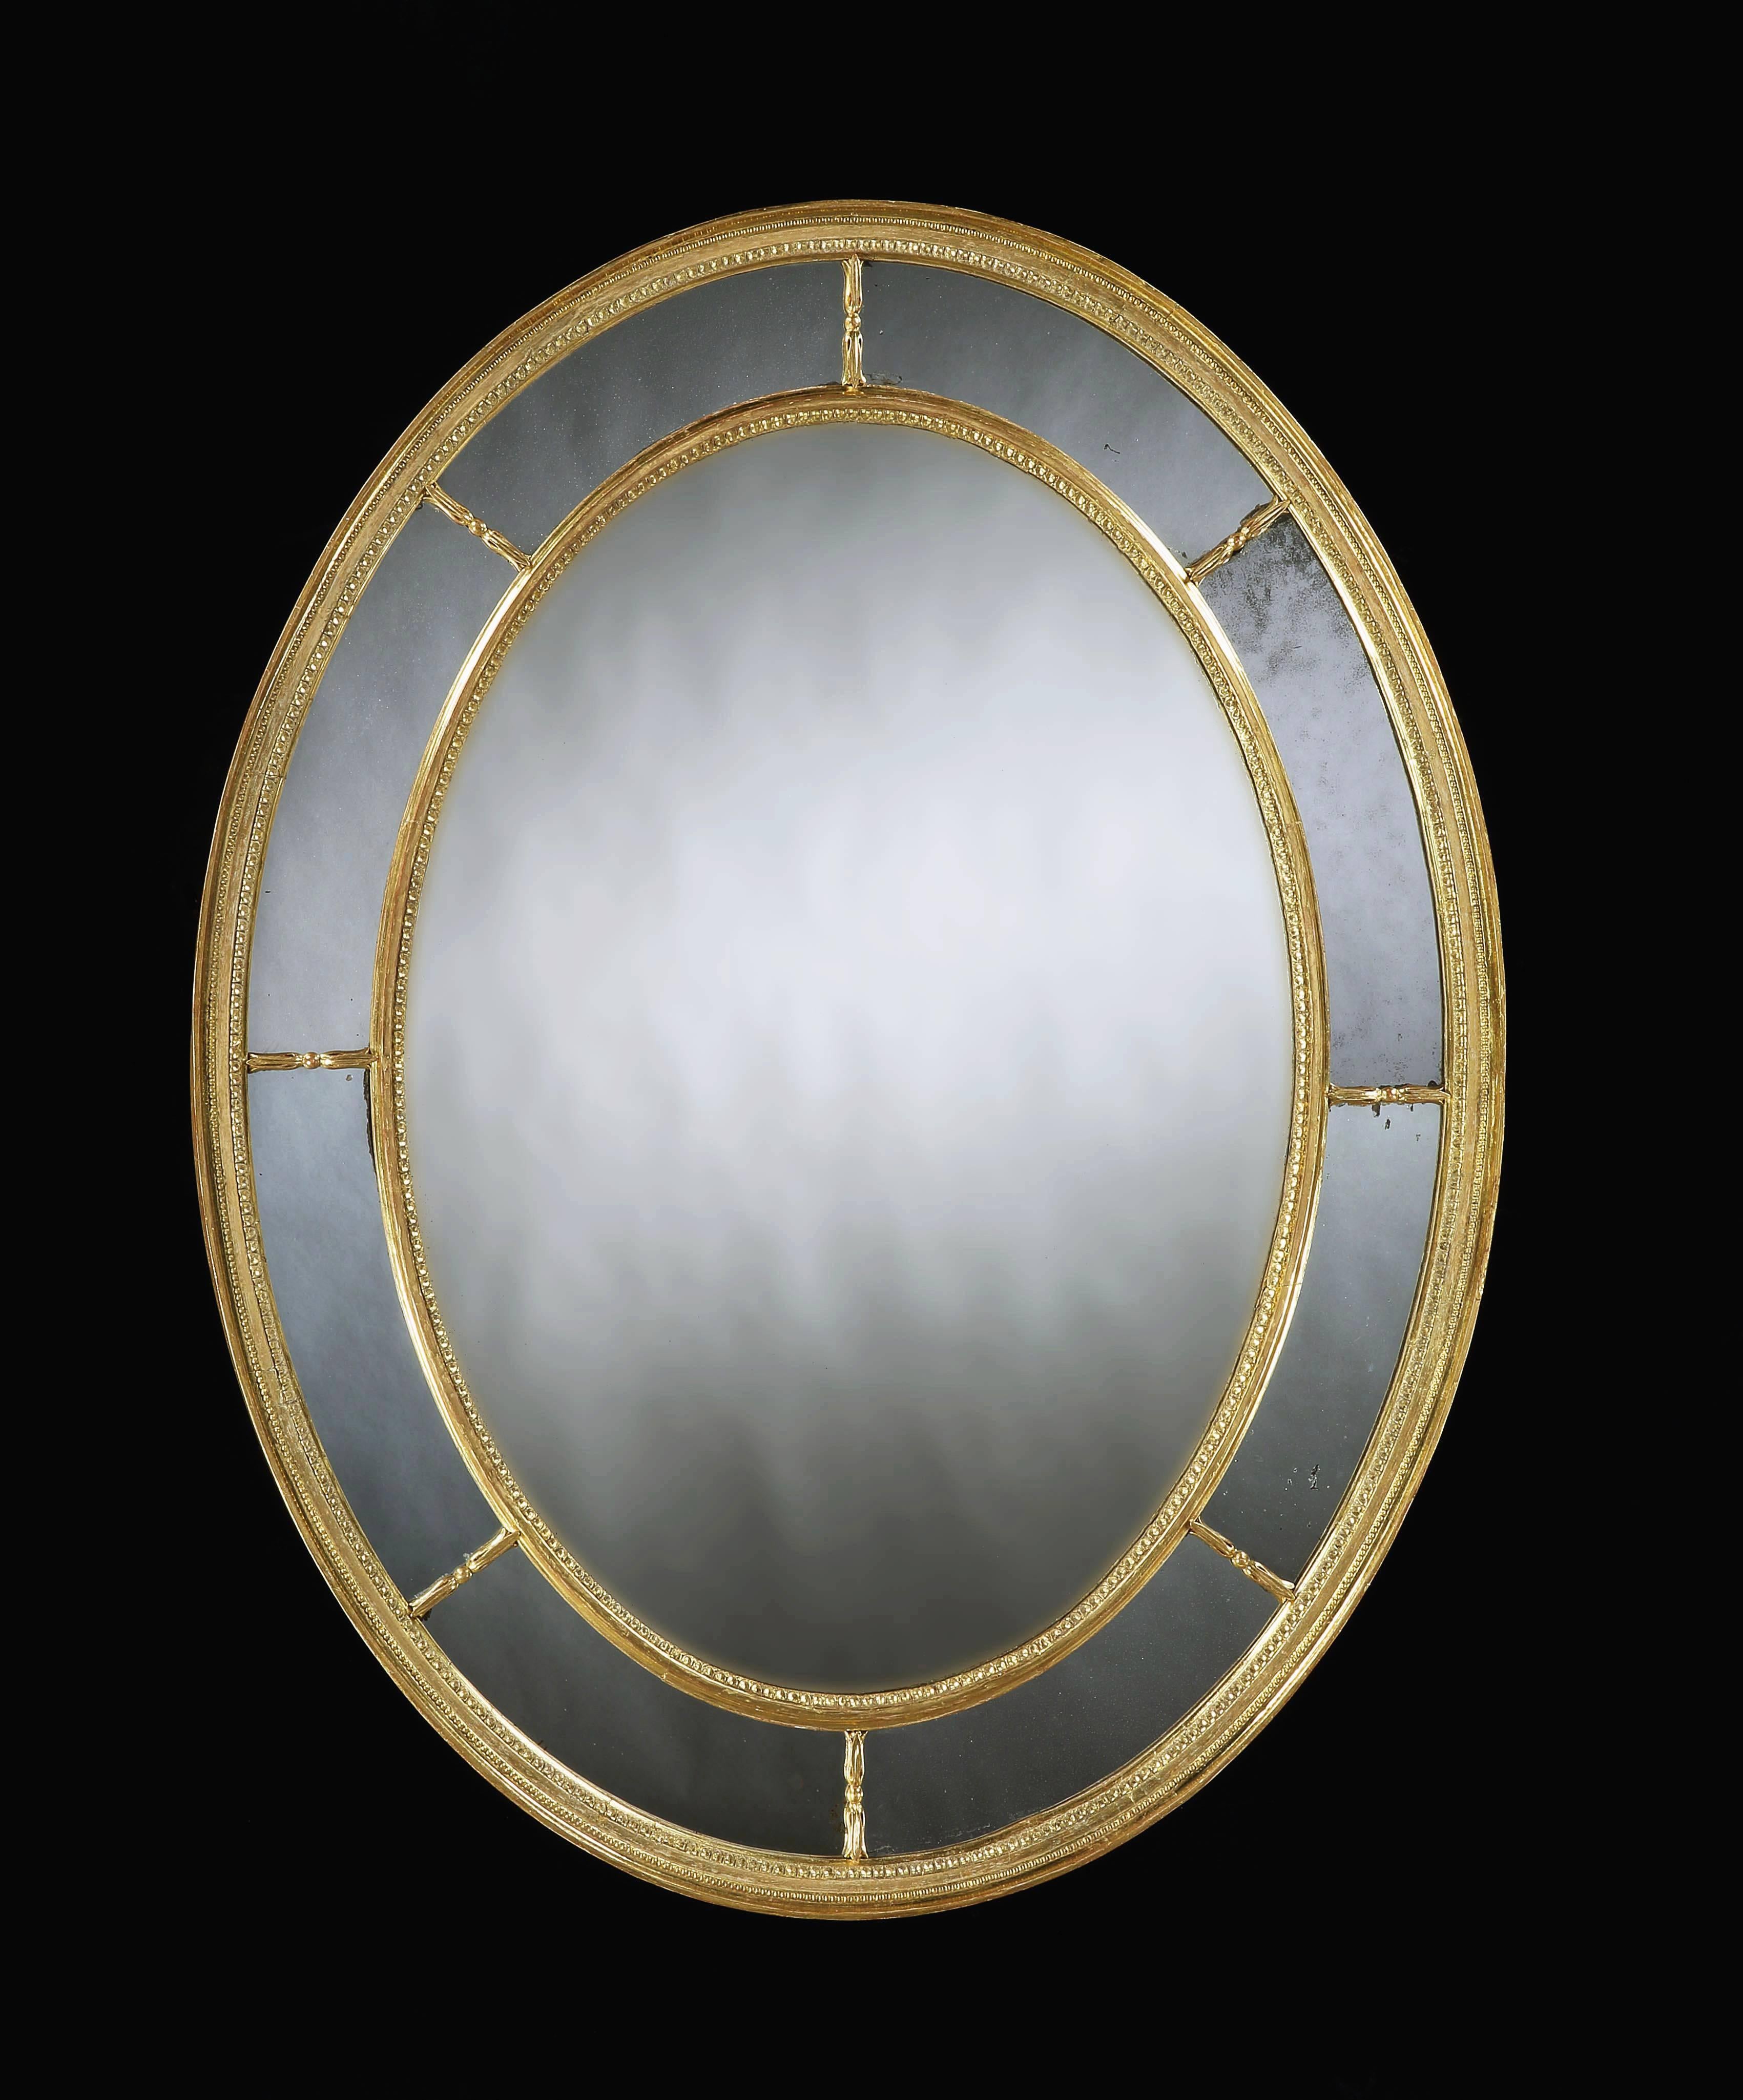 ​
A superbly proportioned oval, and rare large sized George III carved and gilded border glass mirror with fine carved detailing.
 
English, circa 1790.
​
Measures: Height 52" 133 cm,
width 41" 104 cm.
​
This well proportioned